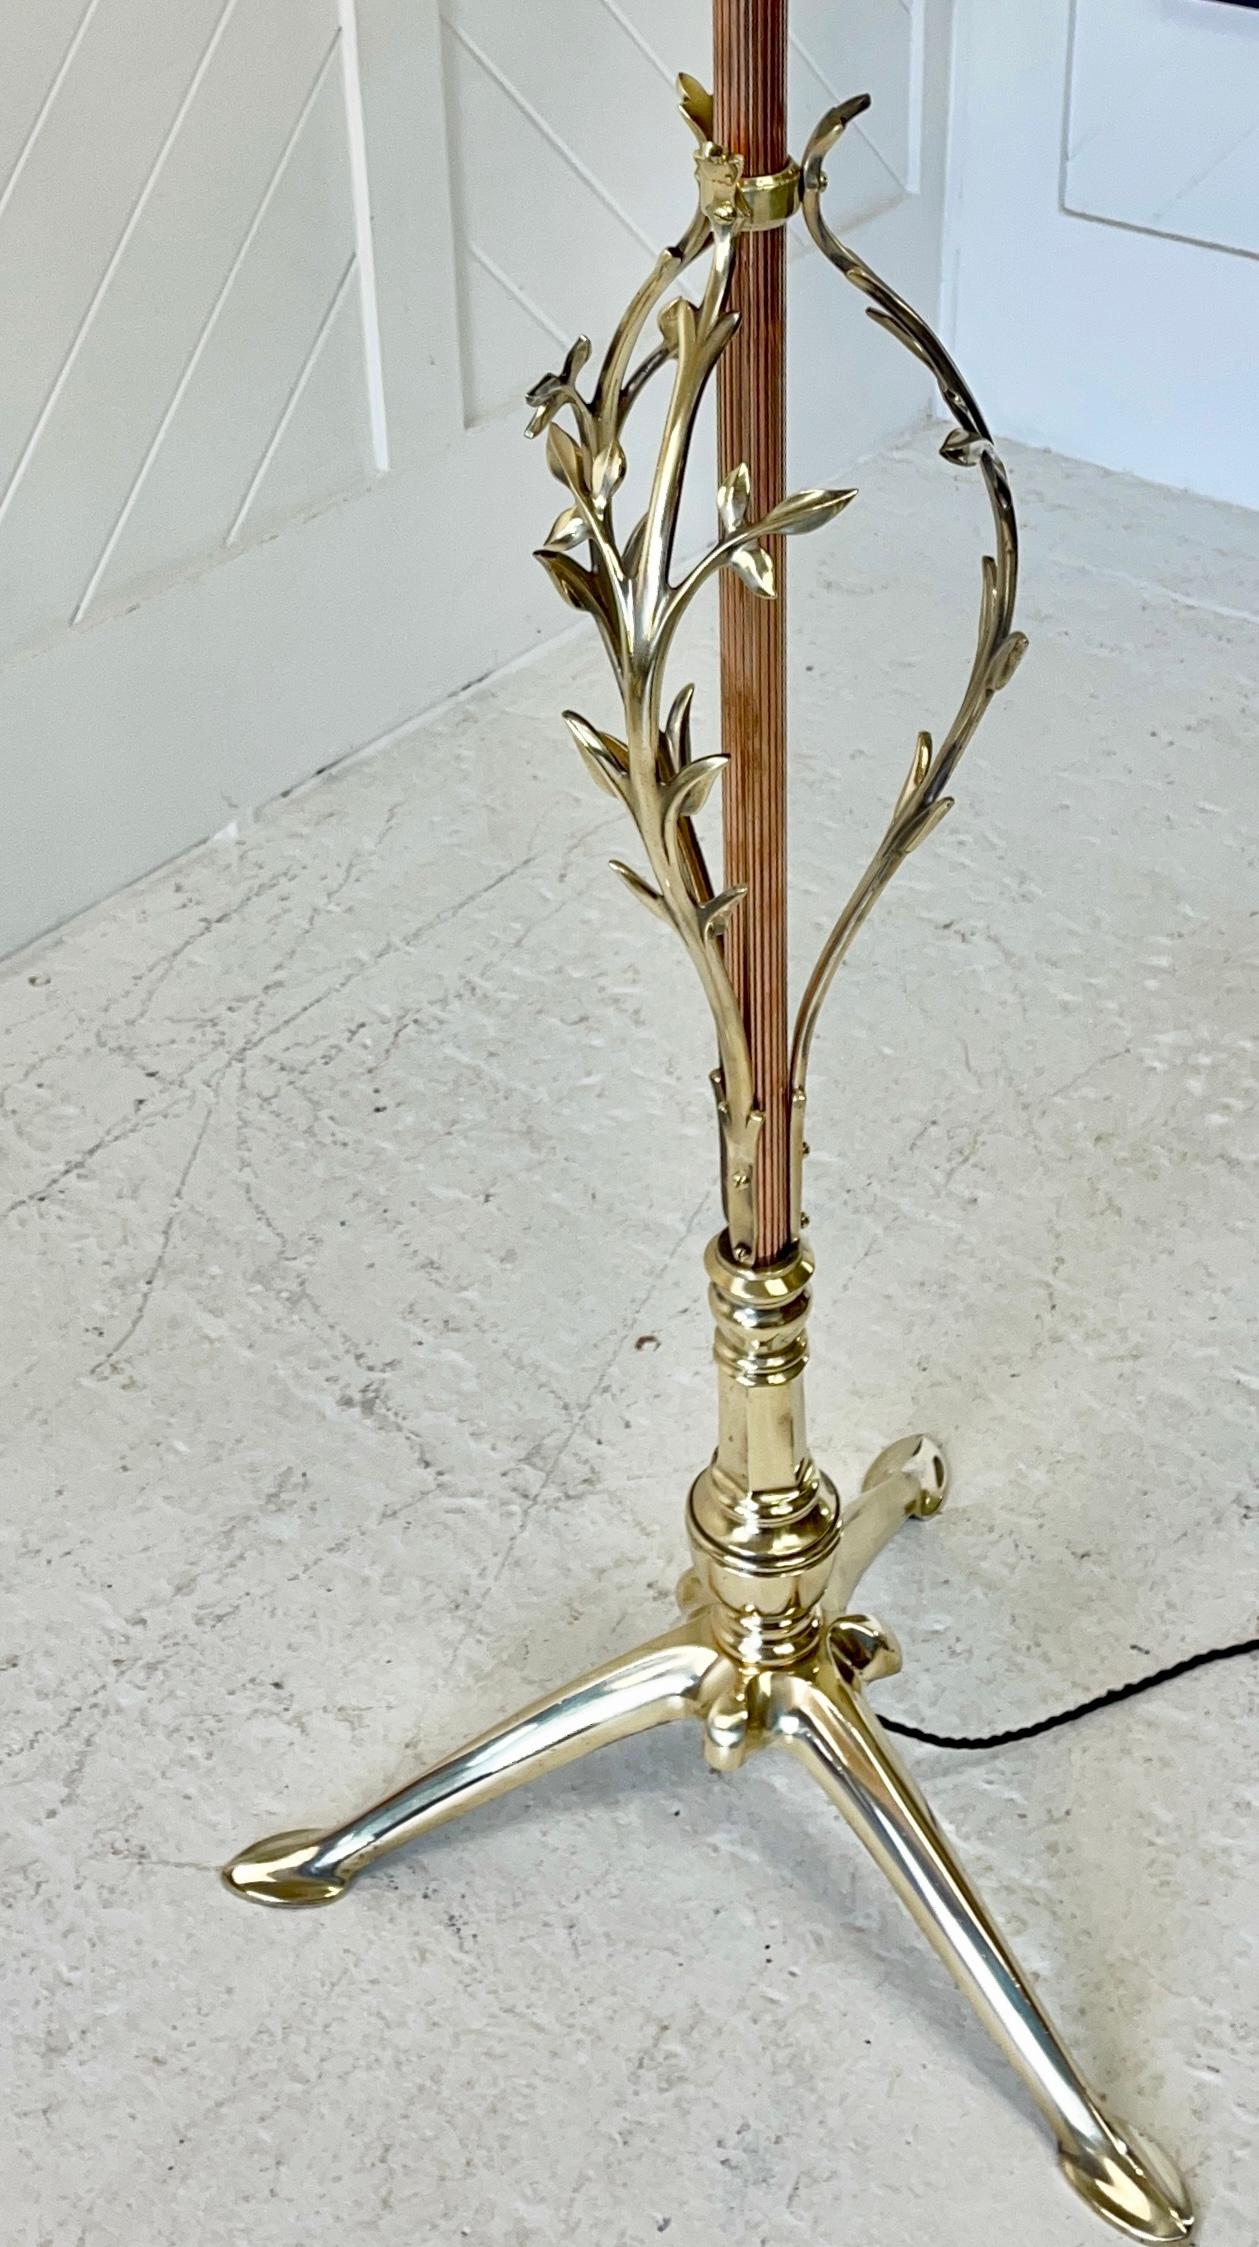 Exceptional quality with wonderful stylised brass leaf decoration
Originally made for electricity
Rare and previously unrecorded
W.A.S. Benson
Circa 1900
Height 144cm extending to 198cm Diameter 48cm
The shade is available to purchase separately

